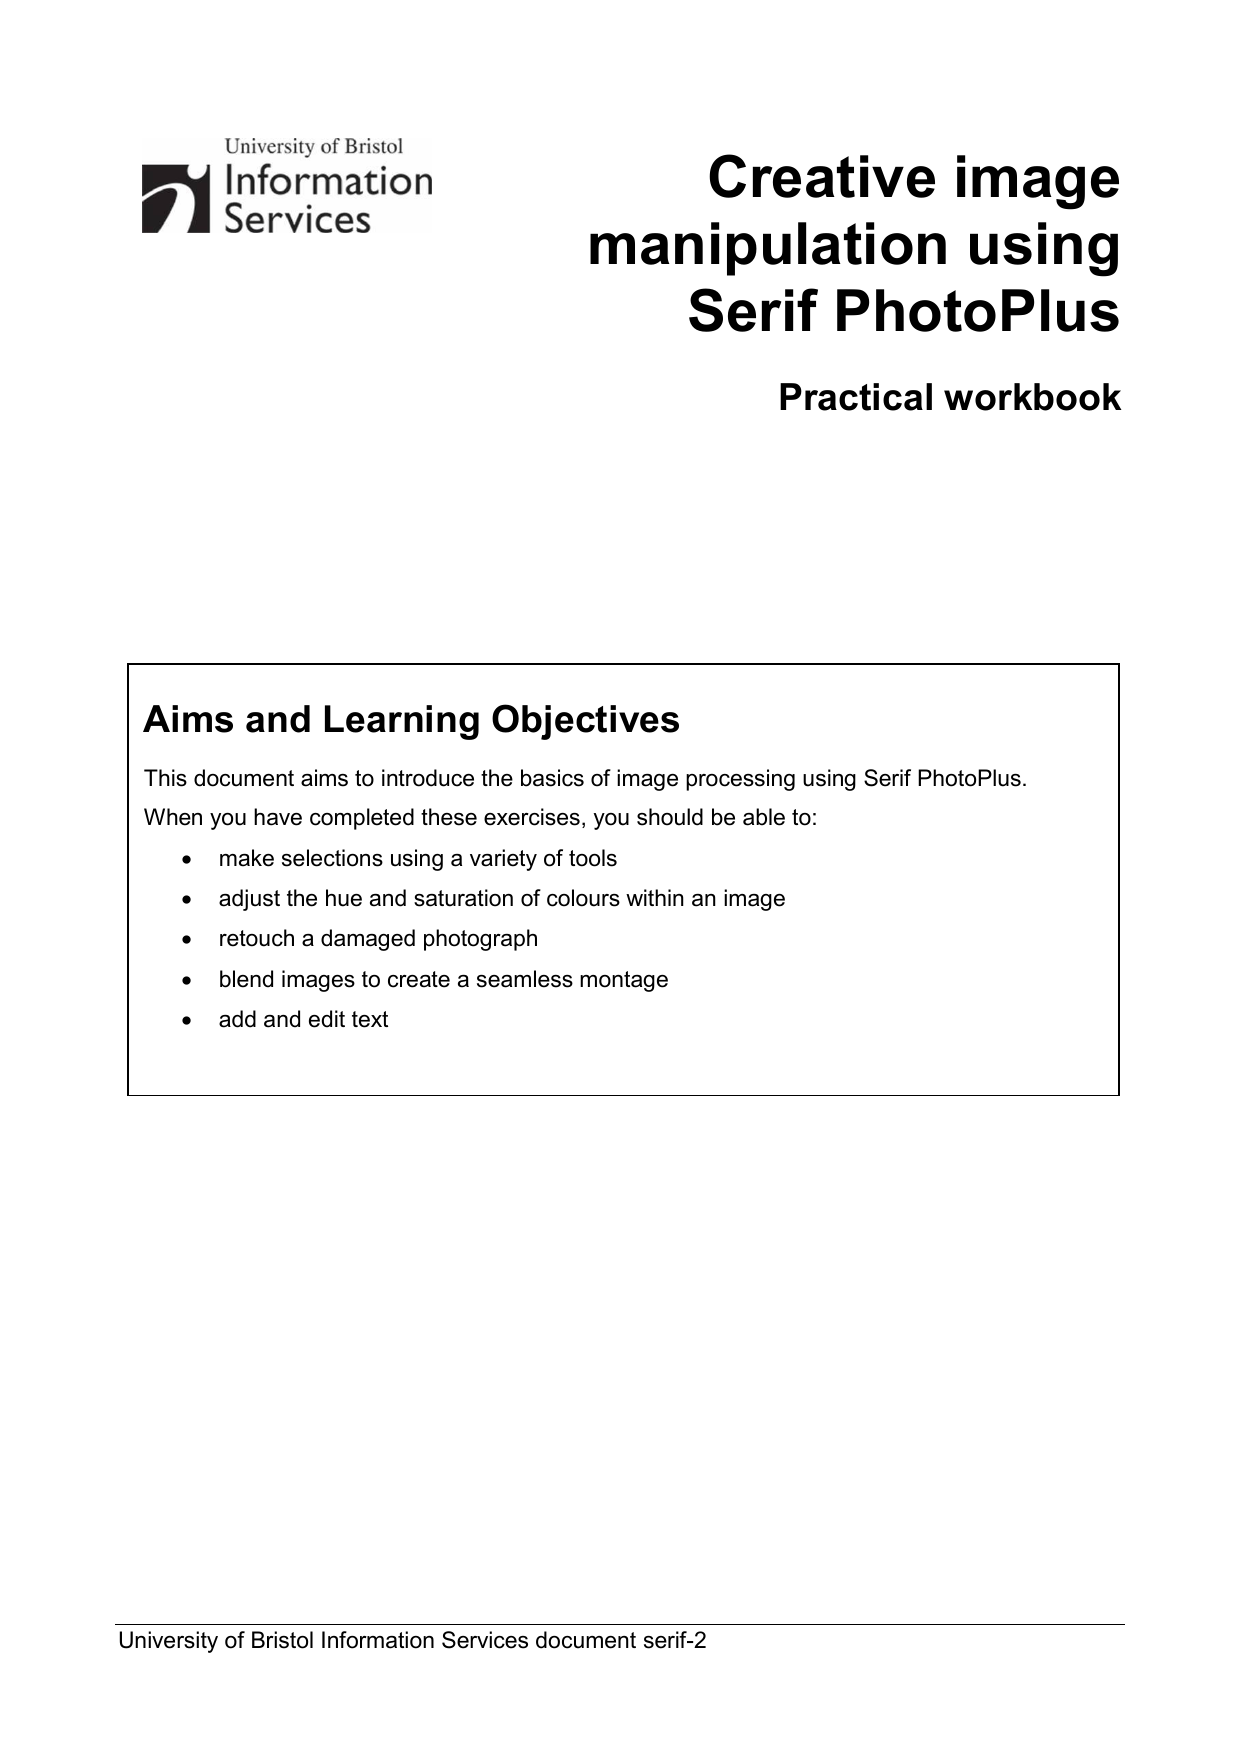 how to straighten an image in serif photoplus x8